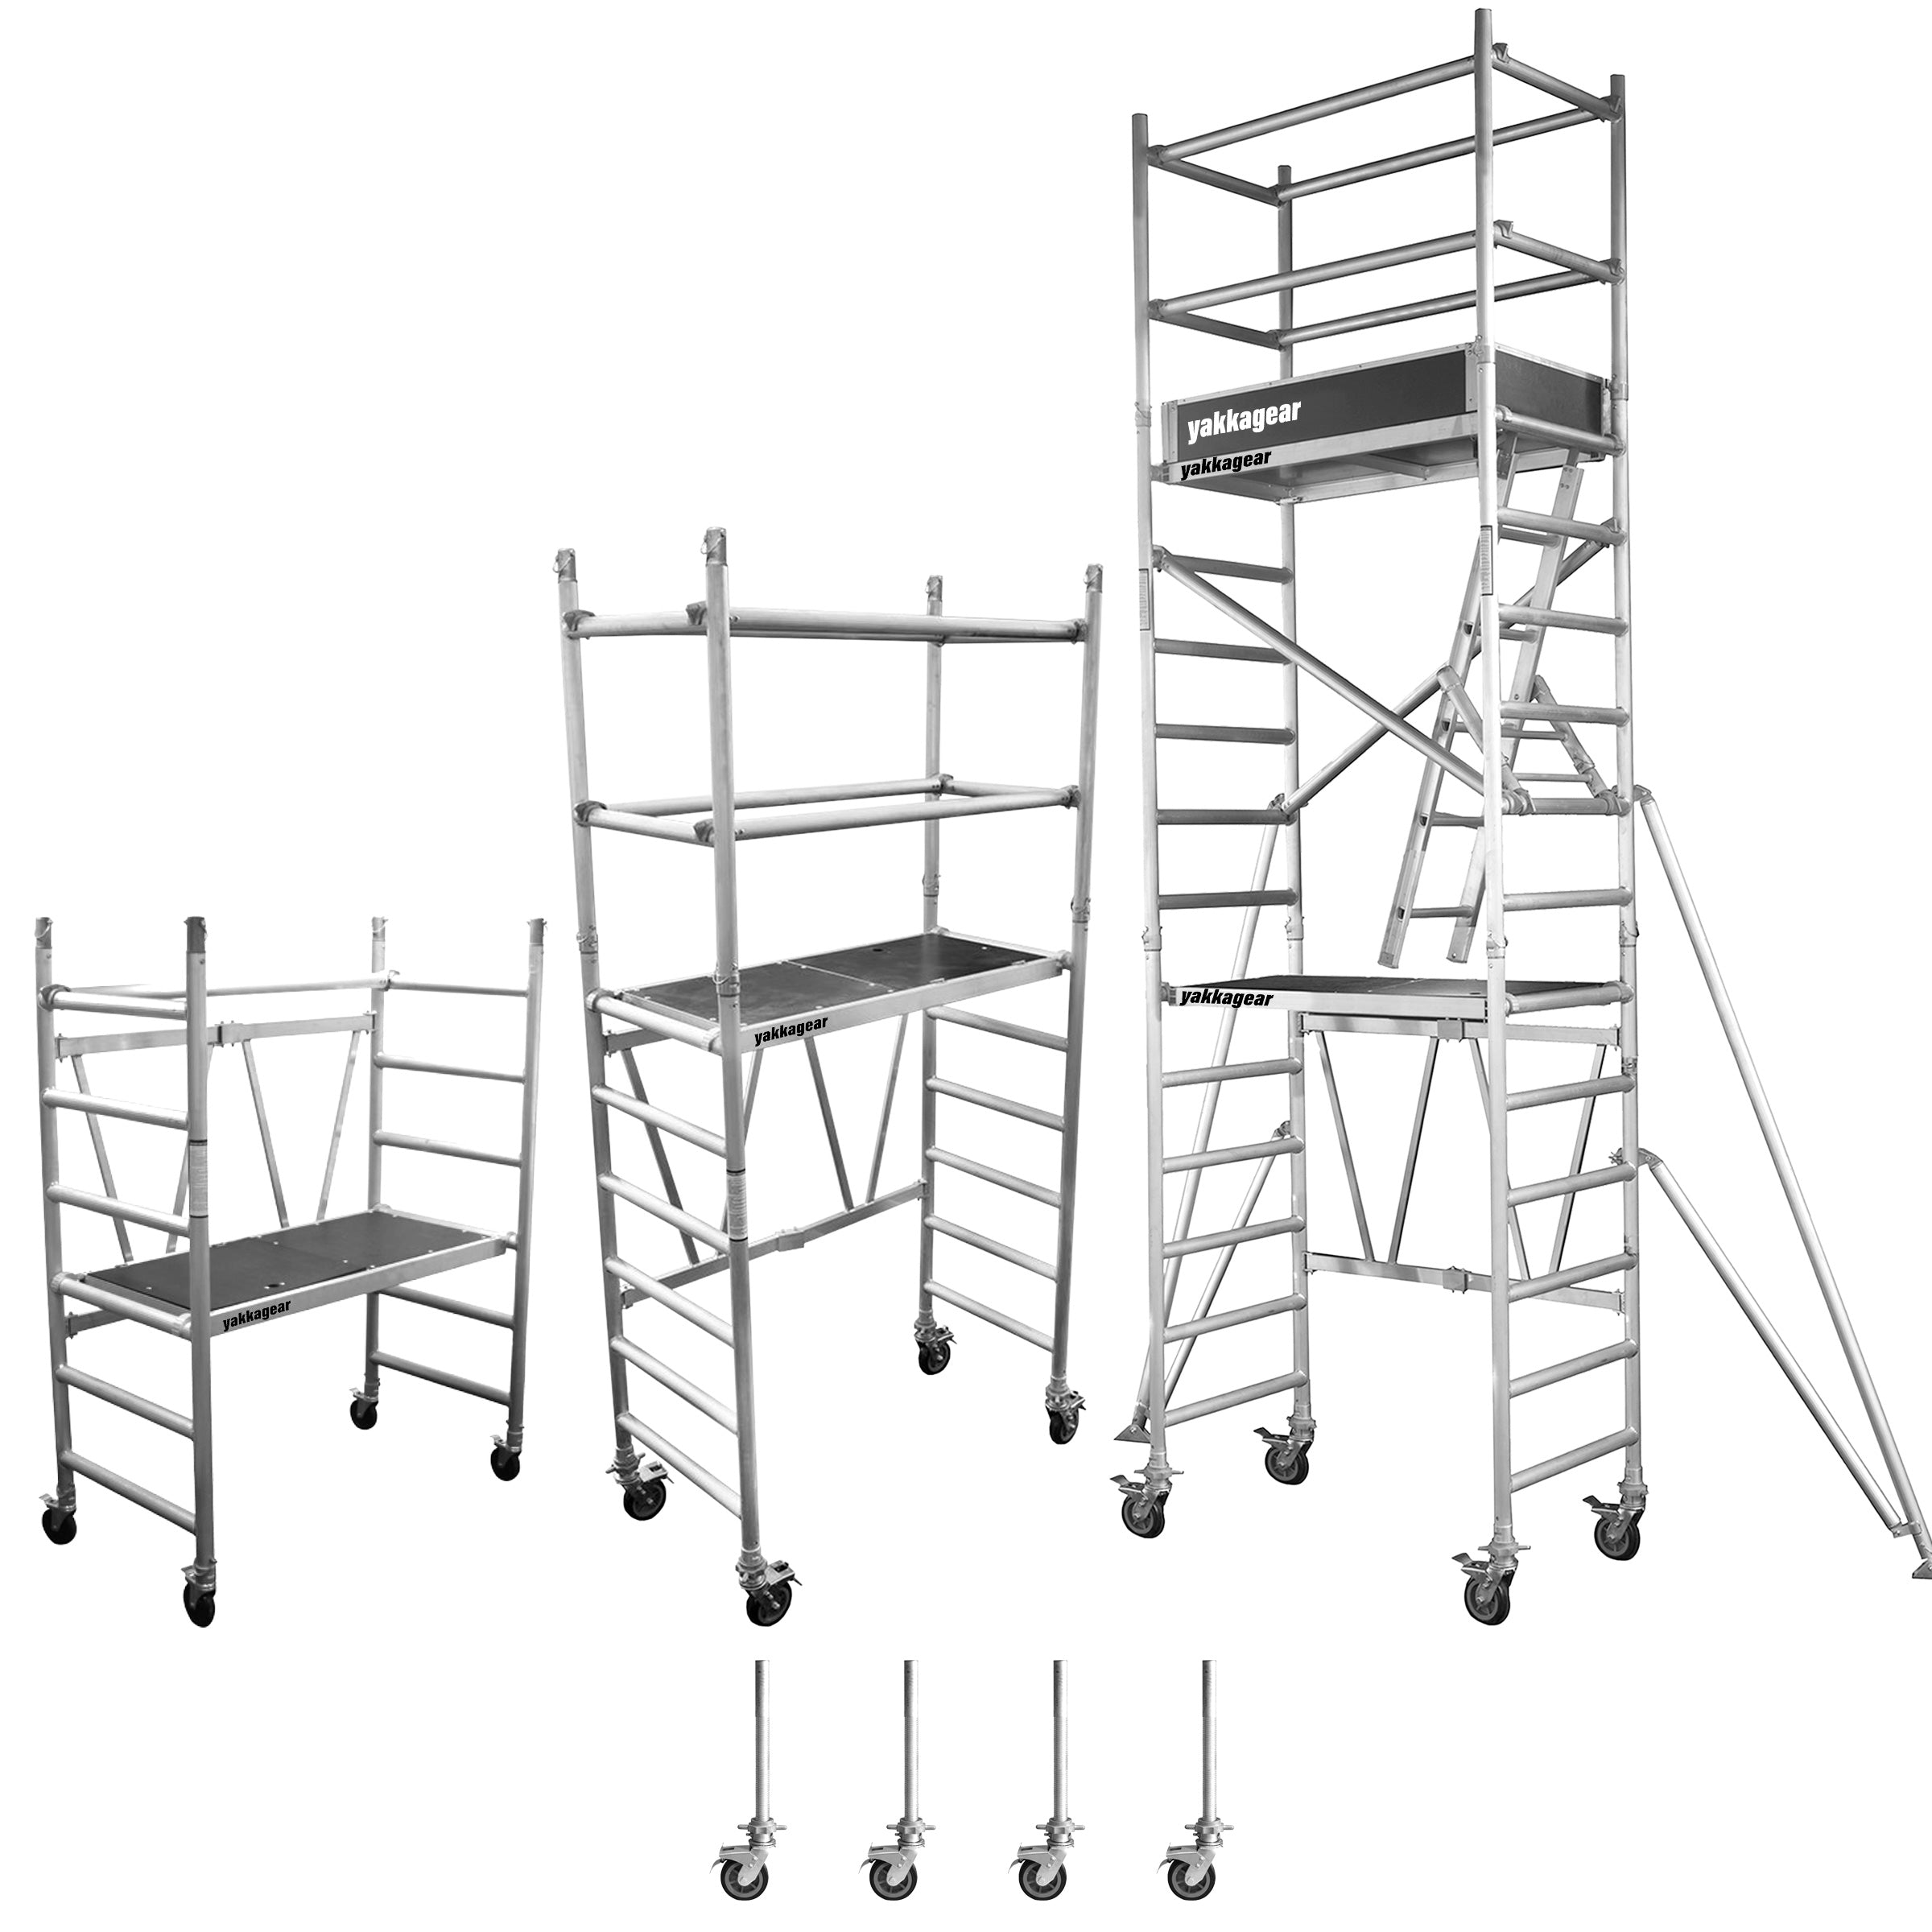 Yakka Gear Australia compact scaffolding tower as access equipment, all three in the same photo, from left to right: 3.25 reach, 3.8m reach, 6m reach. 1.44m Length x 0.74m Width, with working platform heights ranging from 1.2m to 3.9m and reach between 3.25m to 6m, view from the front angle, with white background.